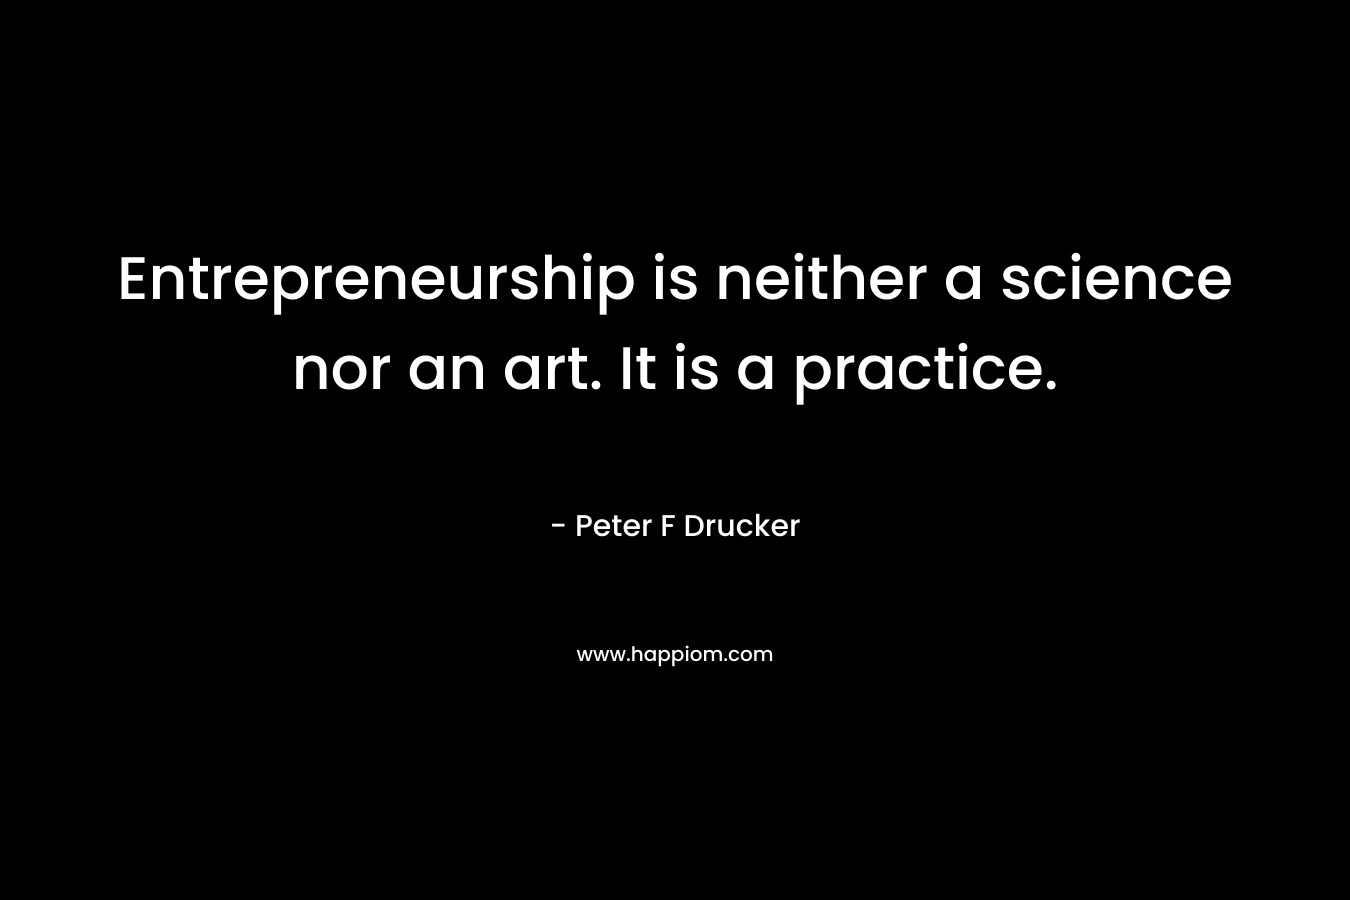 Entrepreneurship is neither a science nor an art. It is a practice. – Peter F Drucker